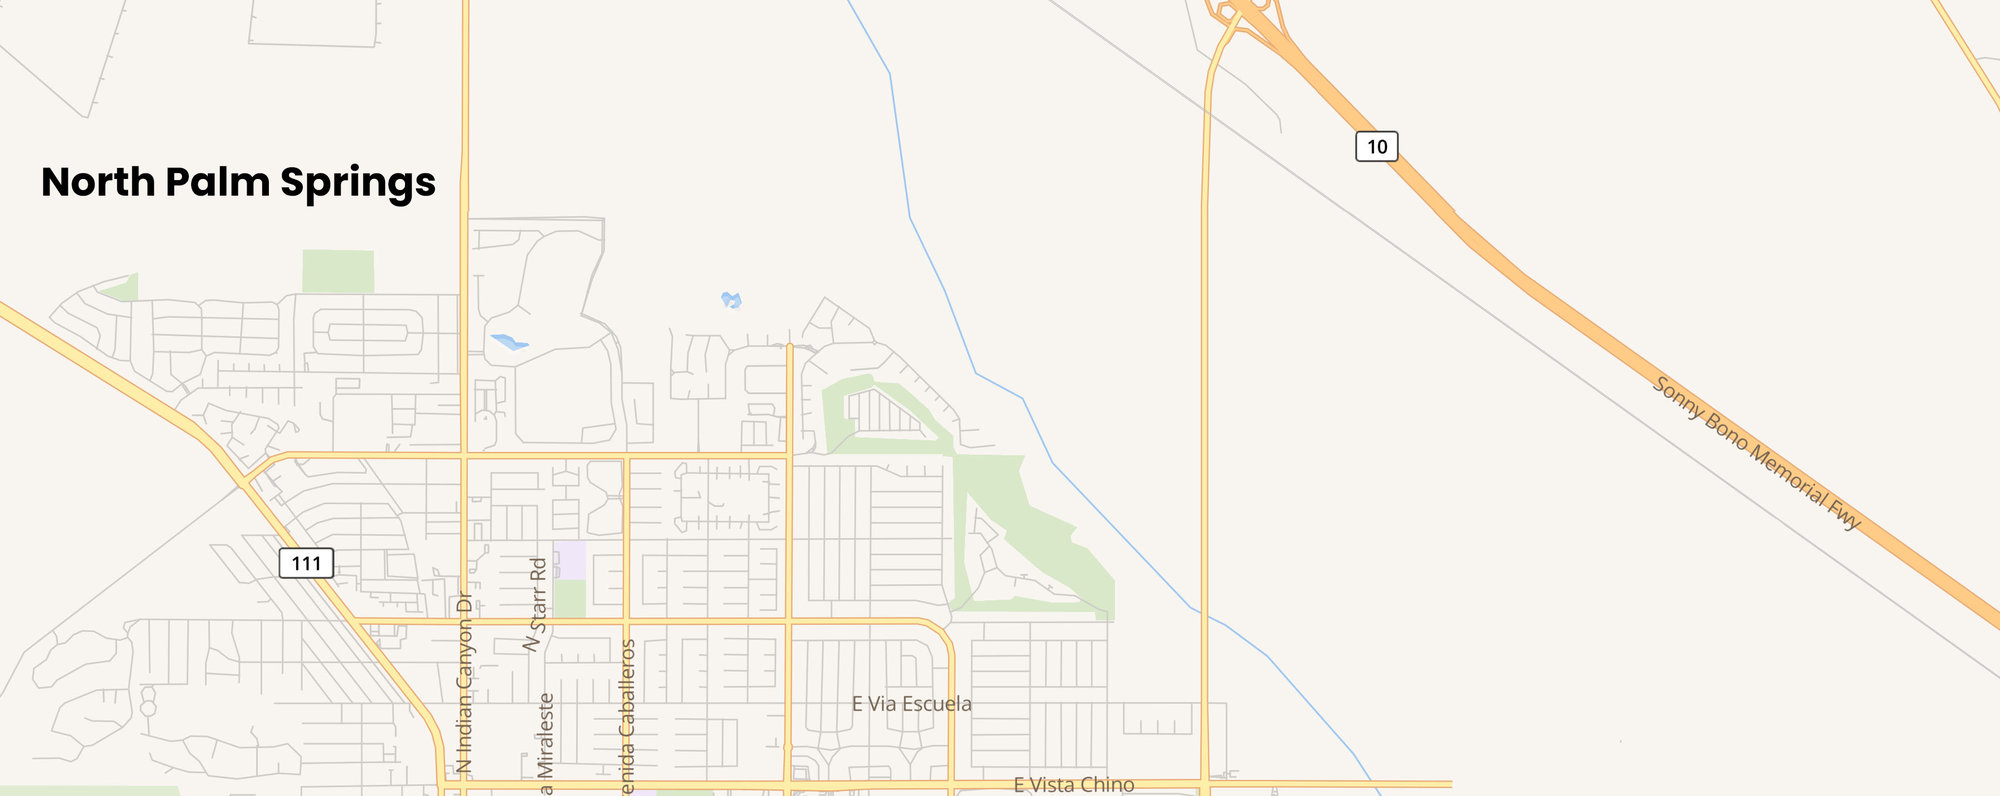 A map of North Palm Springs